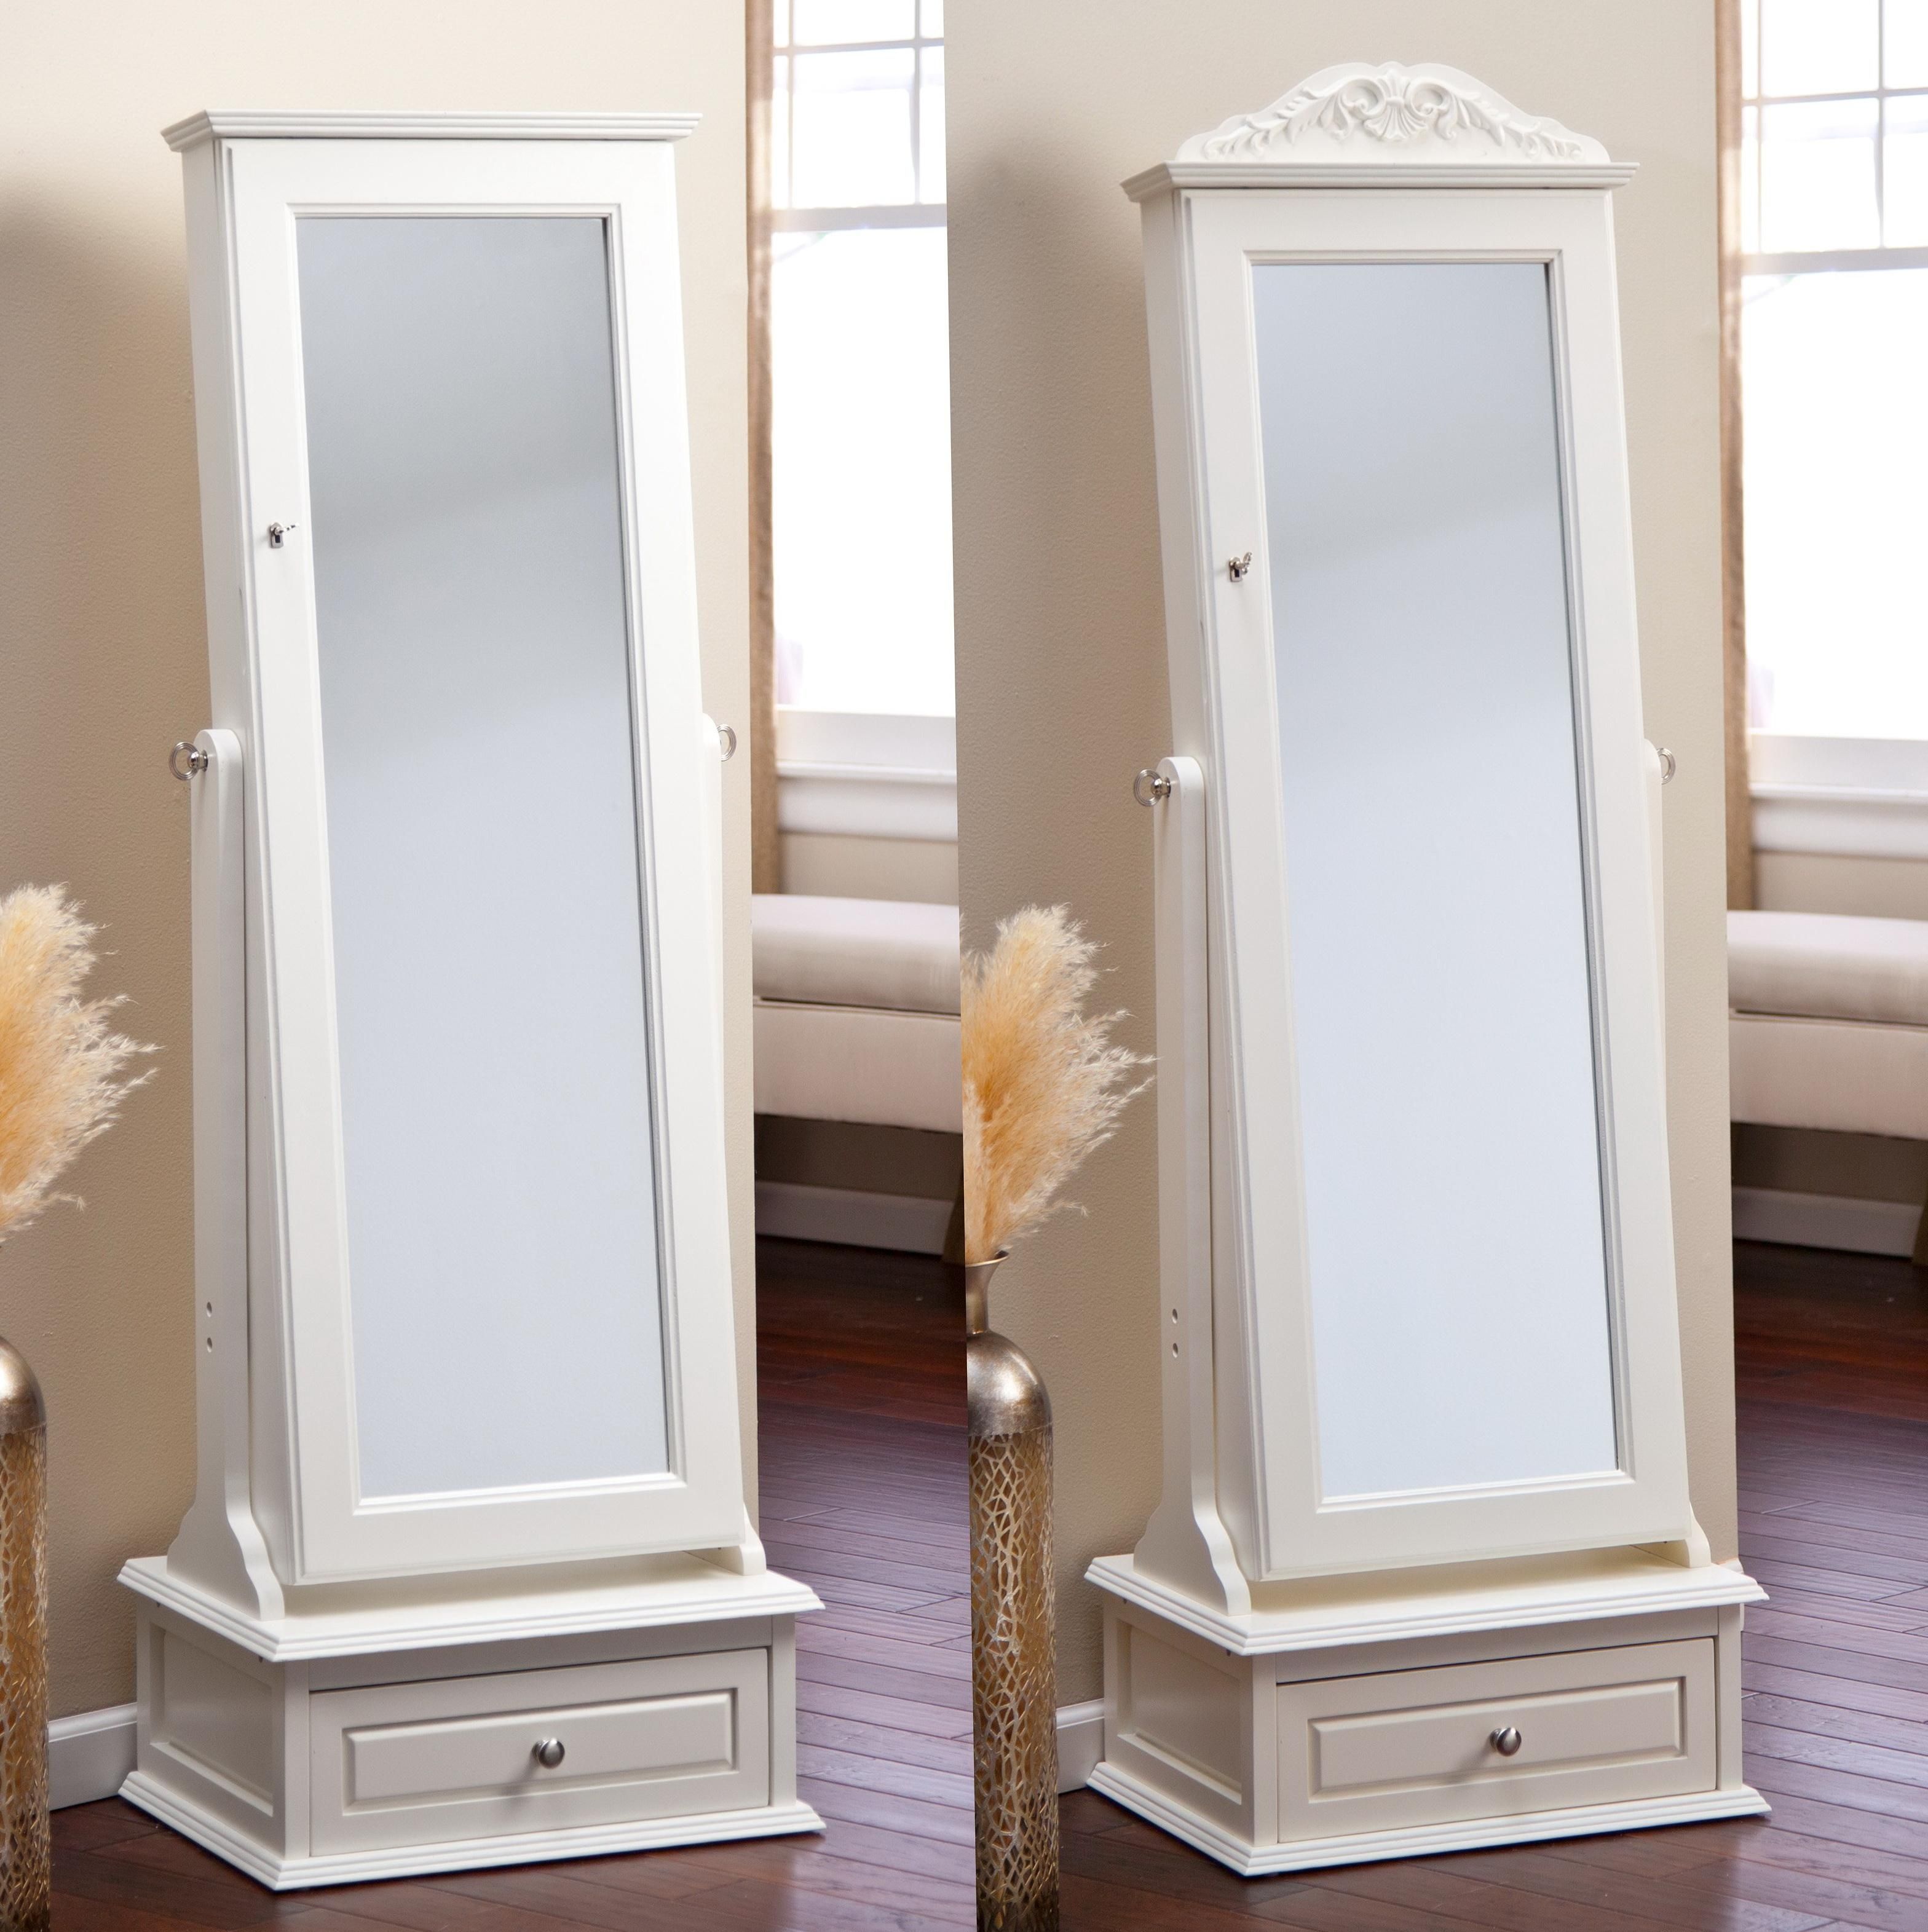 Furniture: Mesmerizing White Jewelry Armoire With Elegant Shaped In Cream Free Standing Mirror (View 5 of 20)